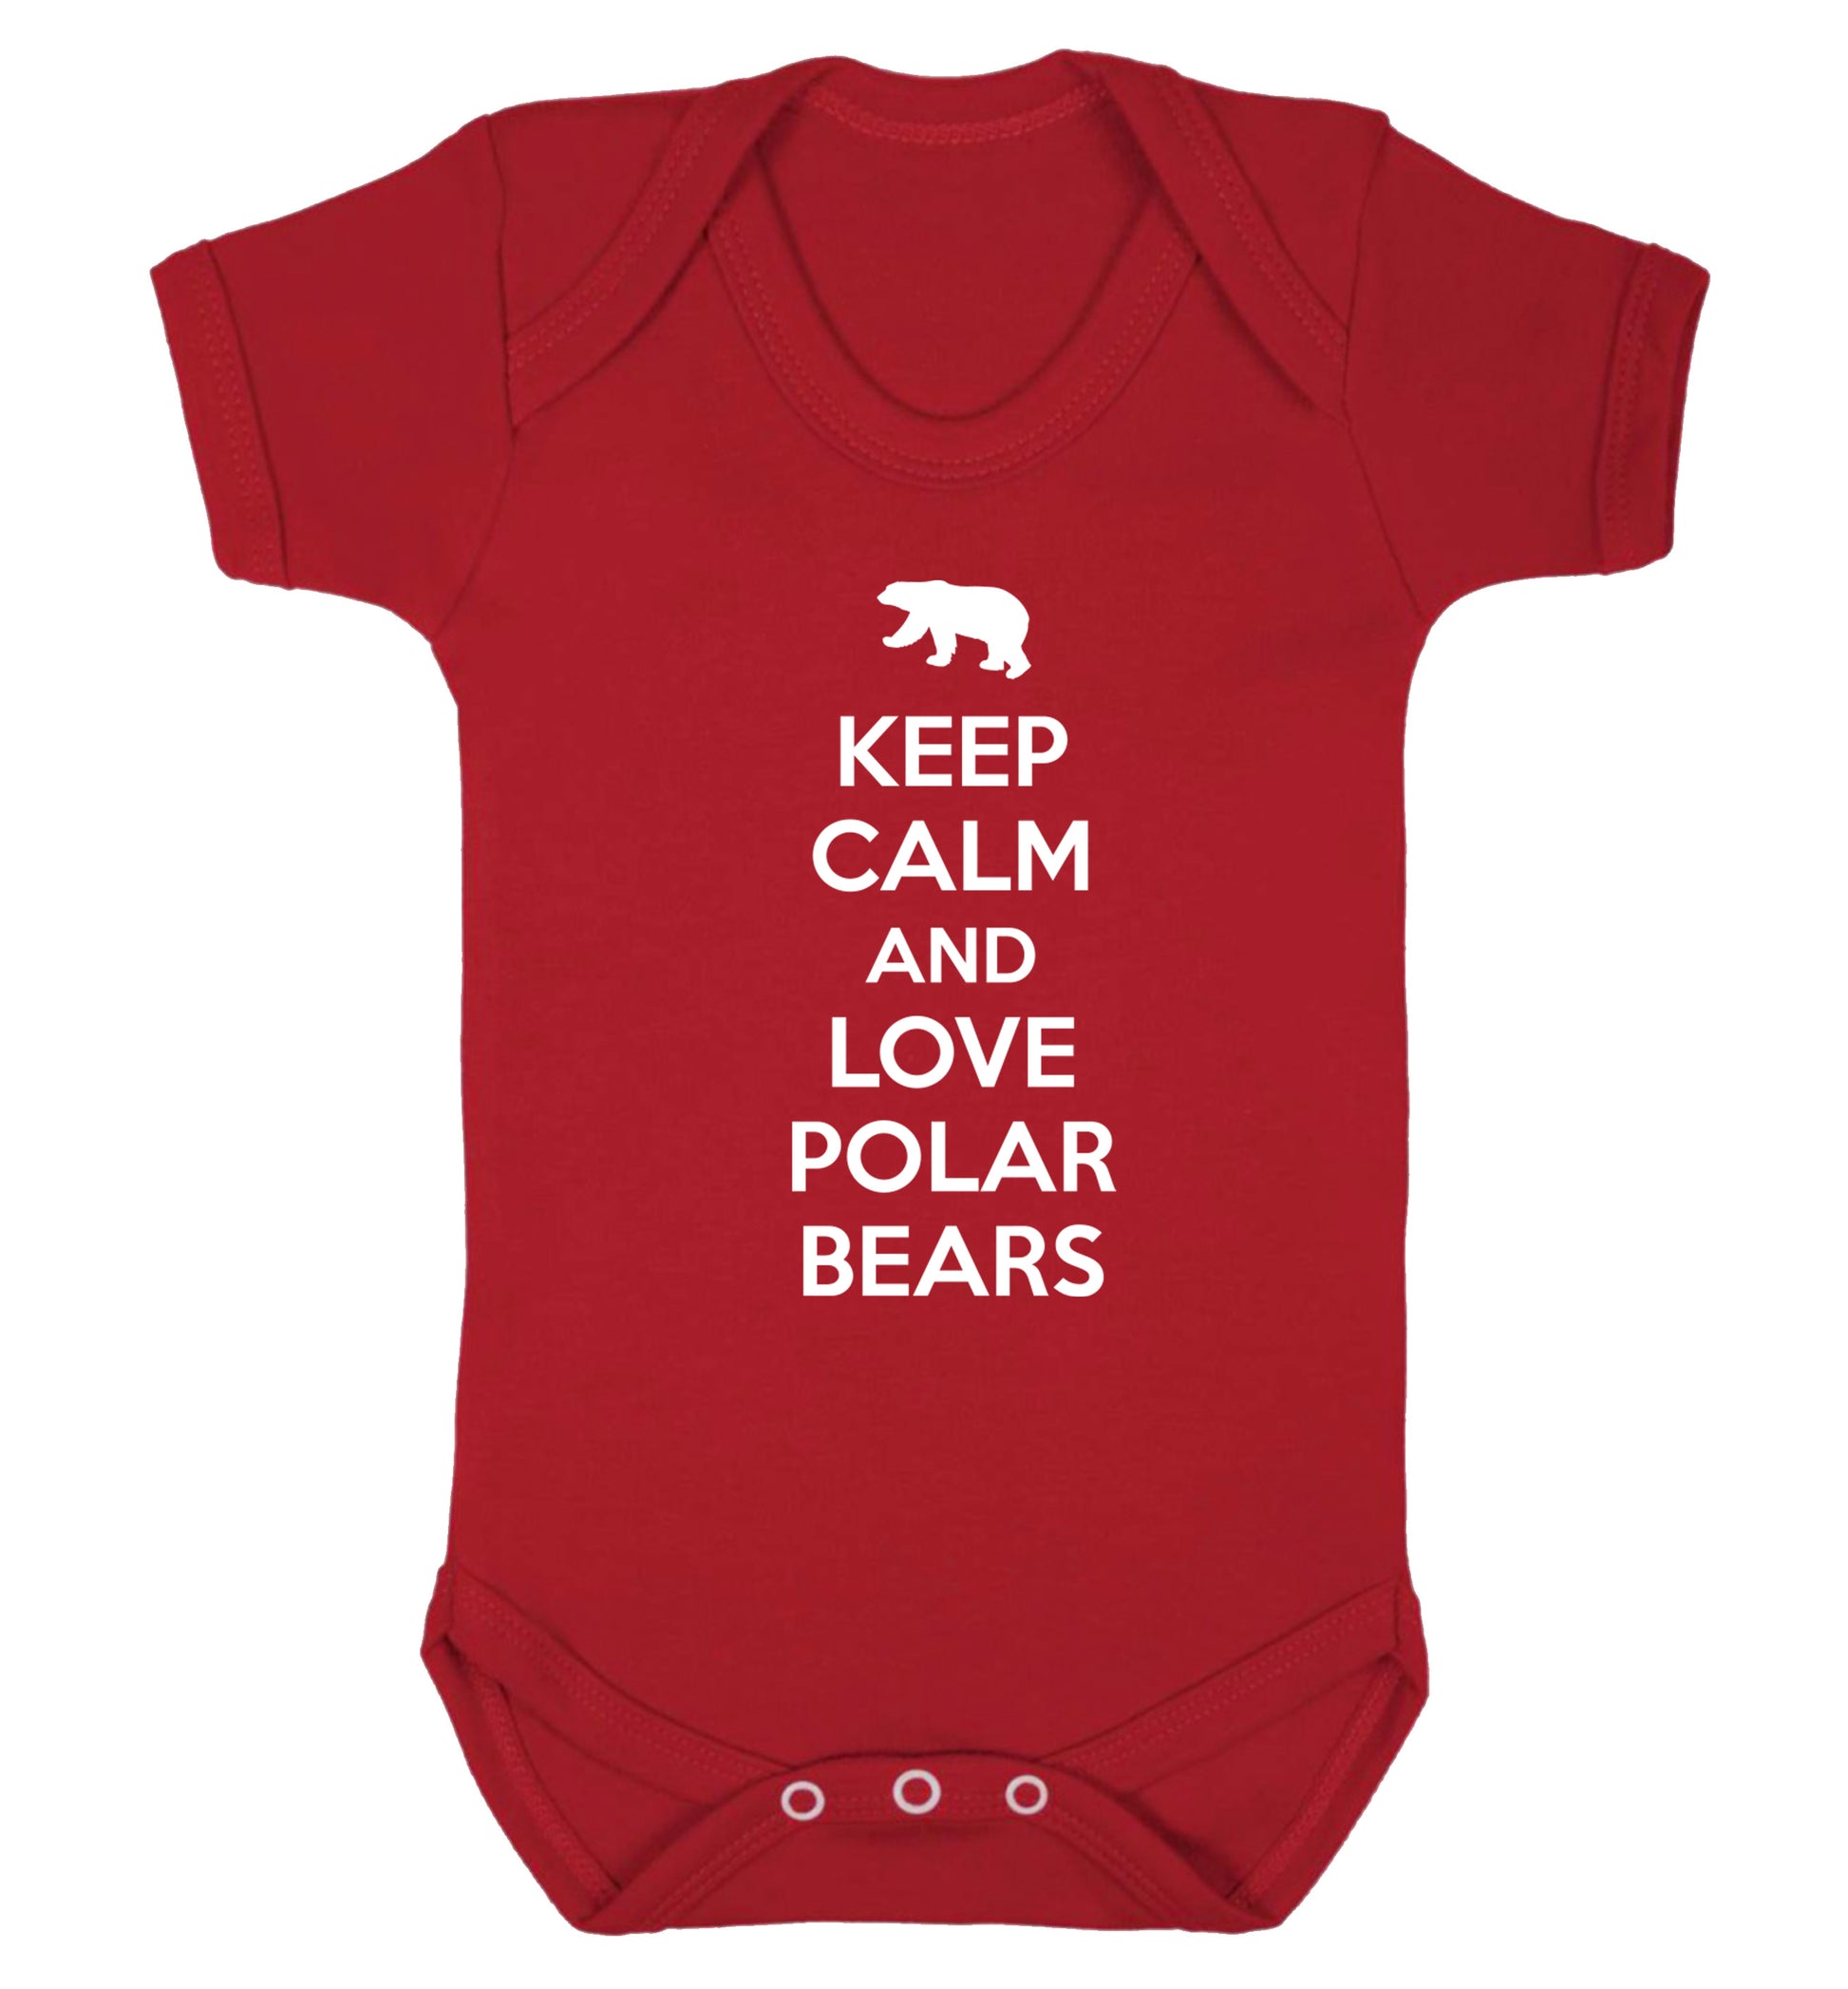 Keep calm and love polar bears Baby Vest red 18-24 months